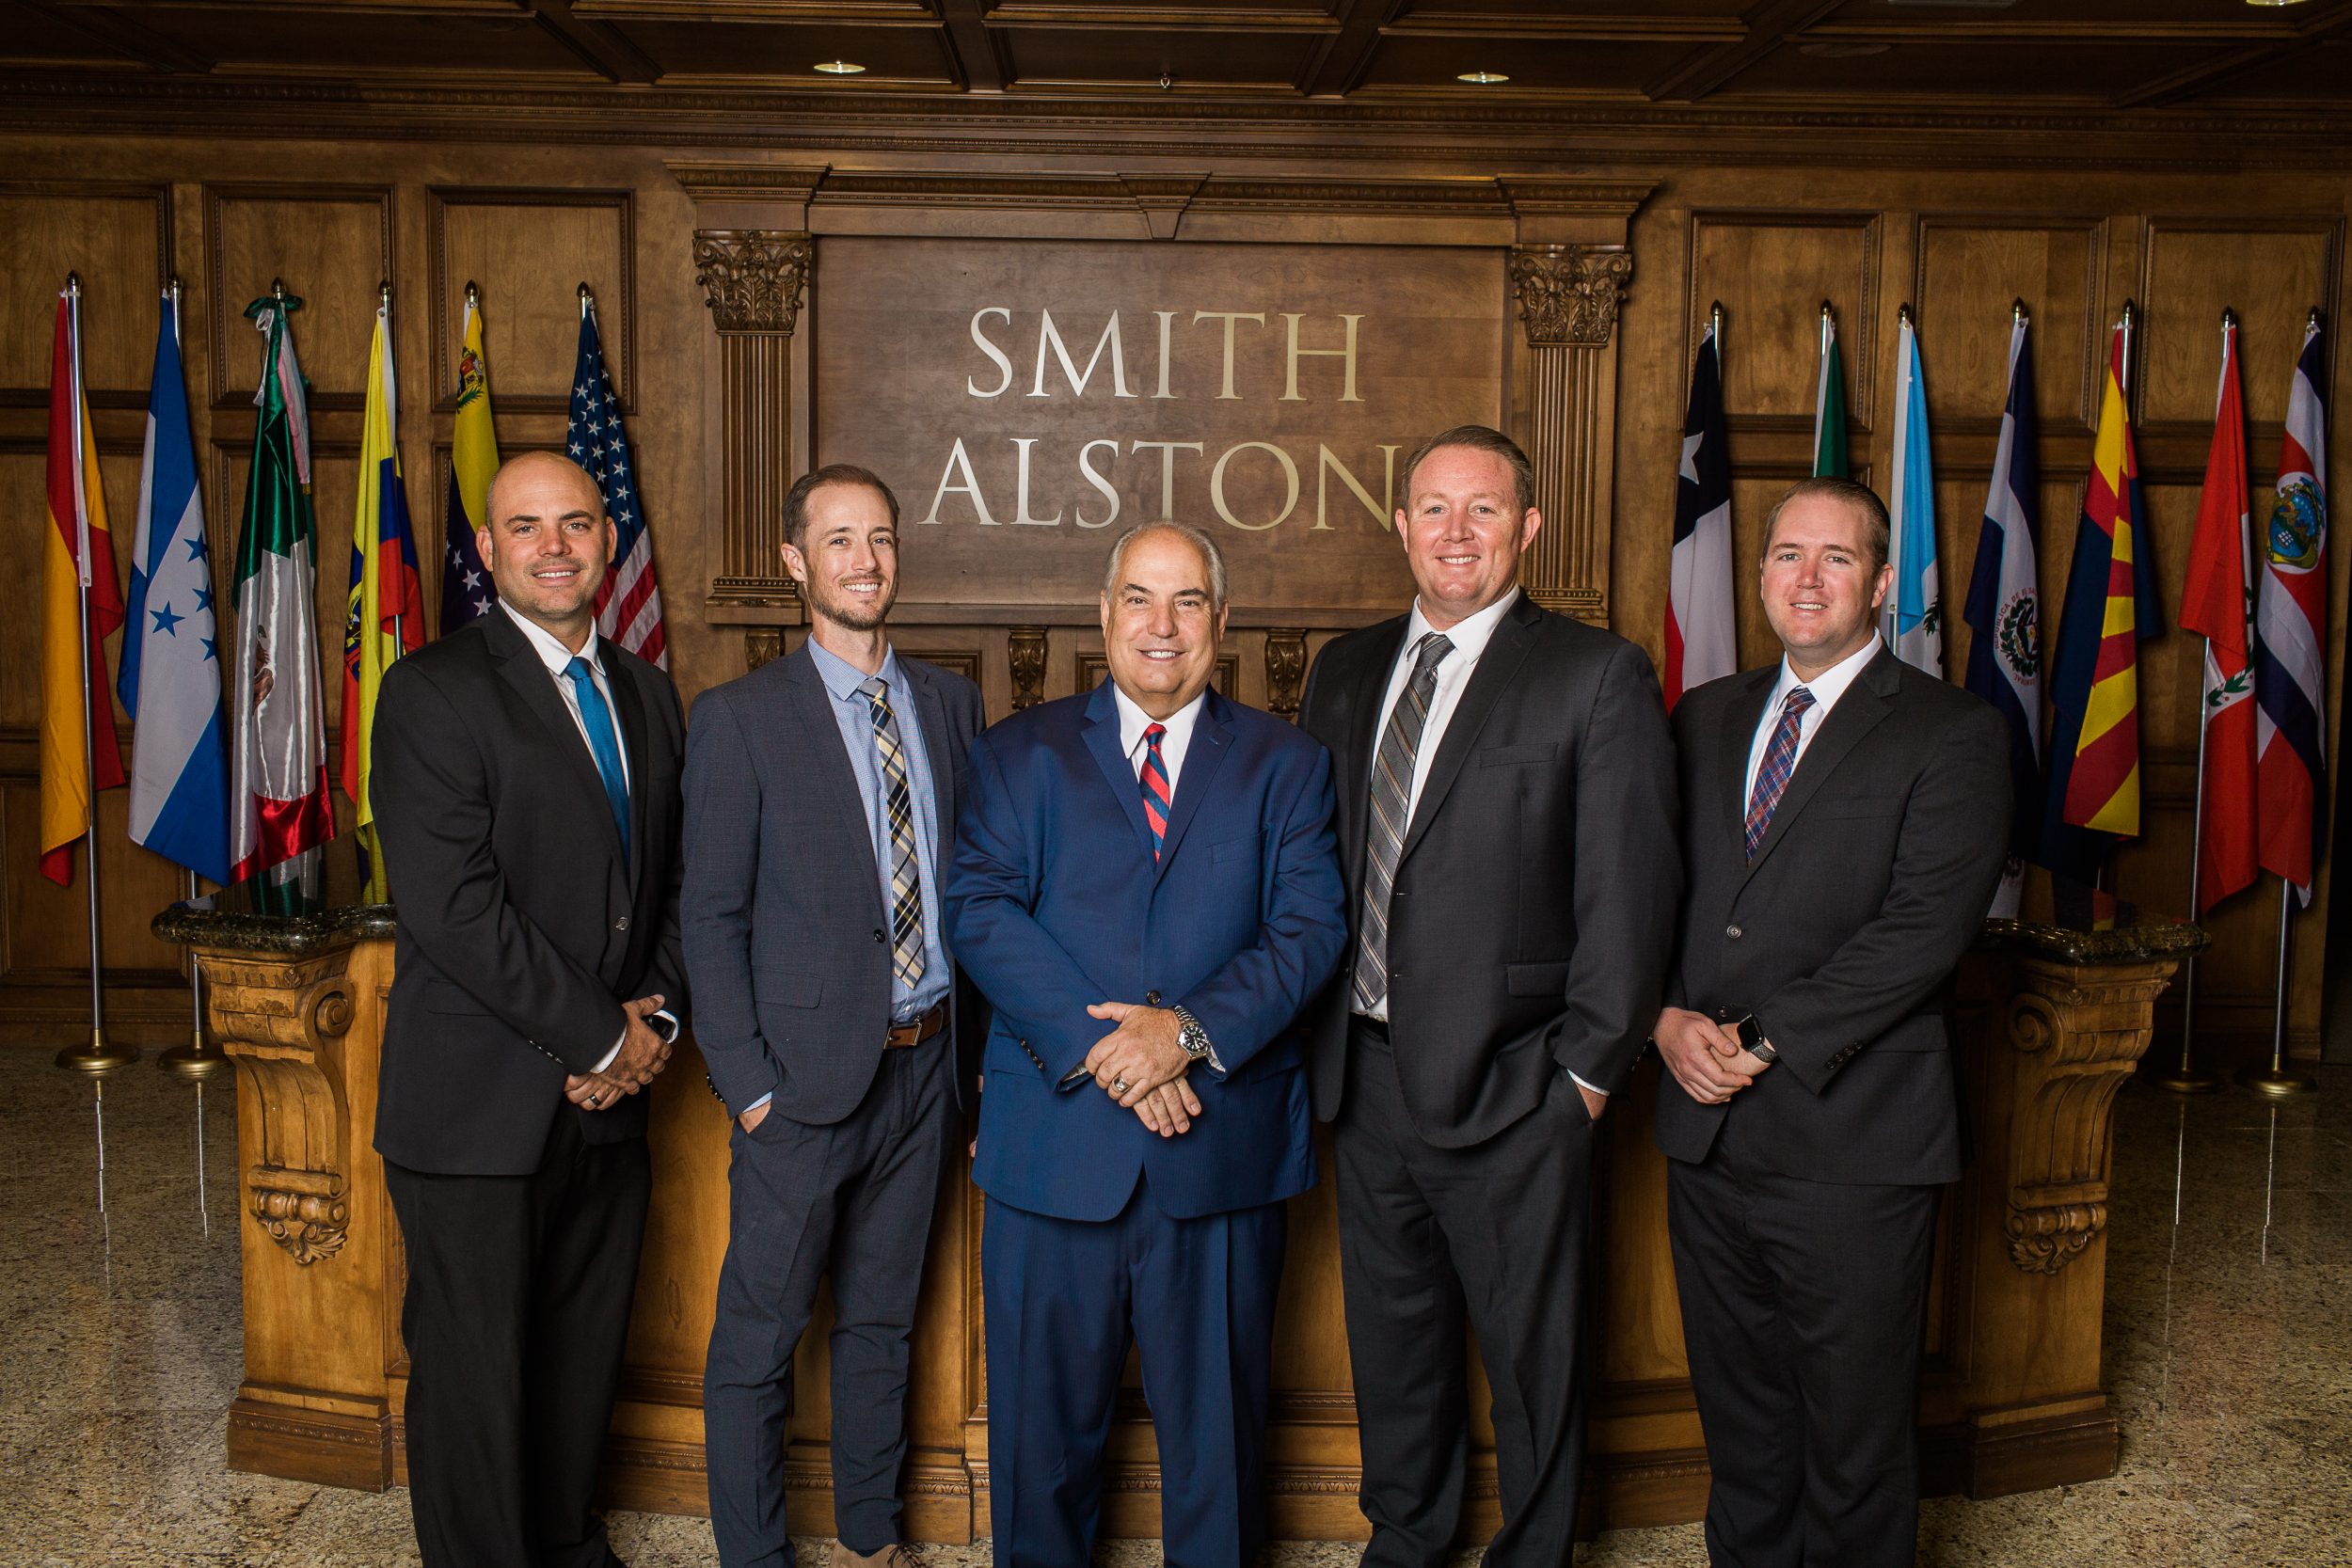 The entire team of the Smith Alston law firm